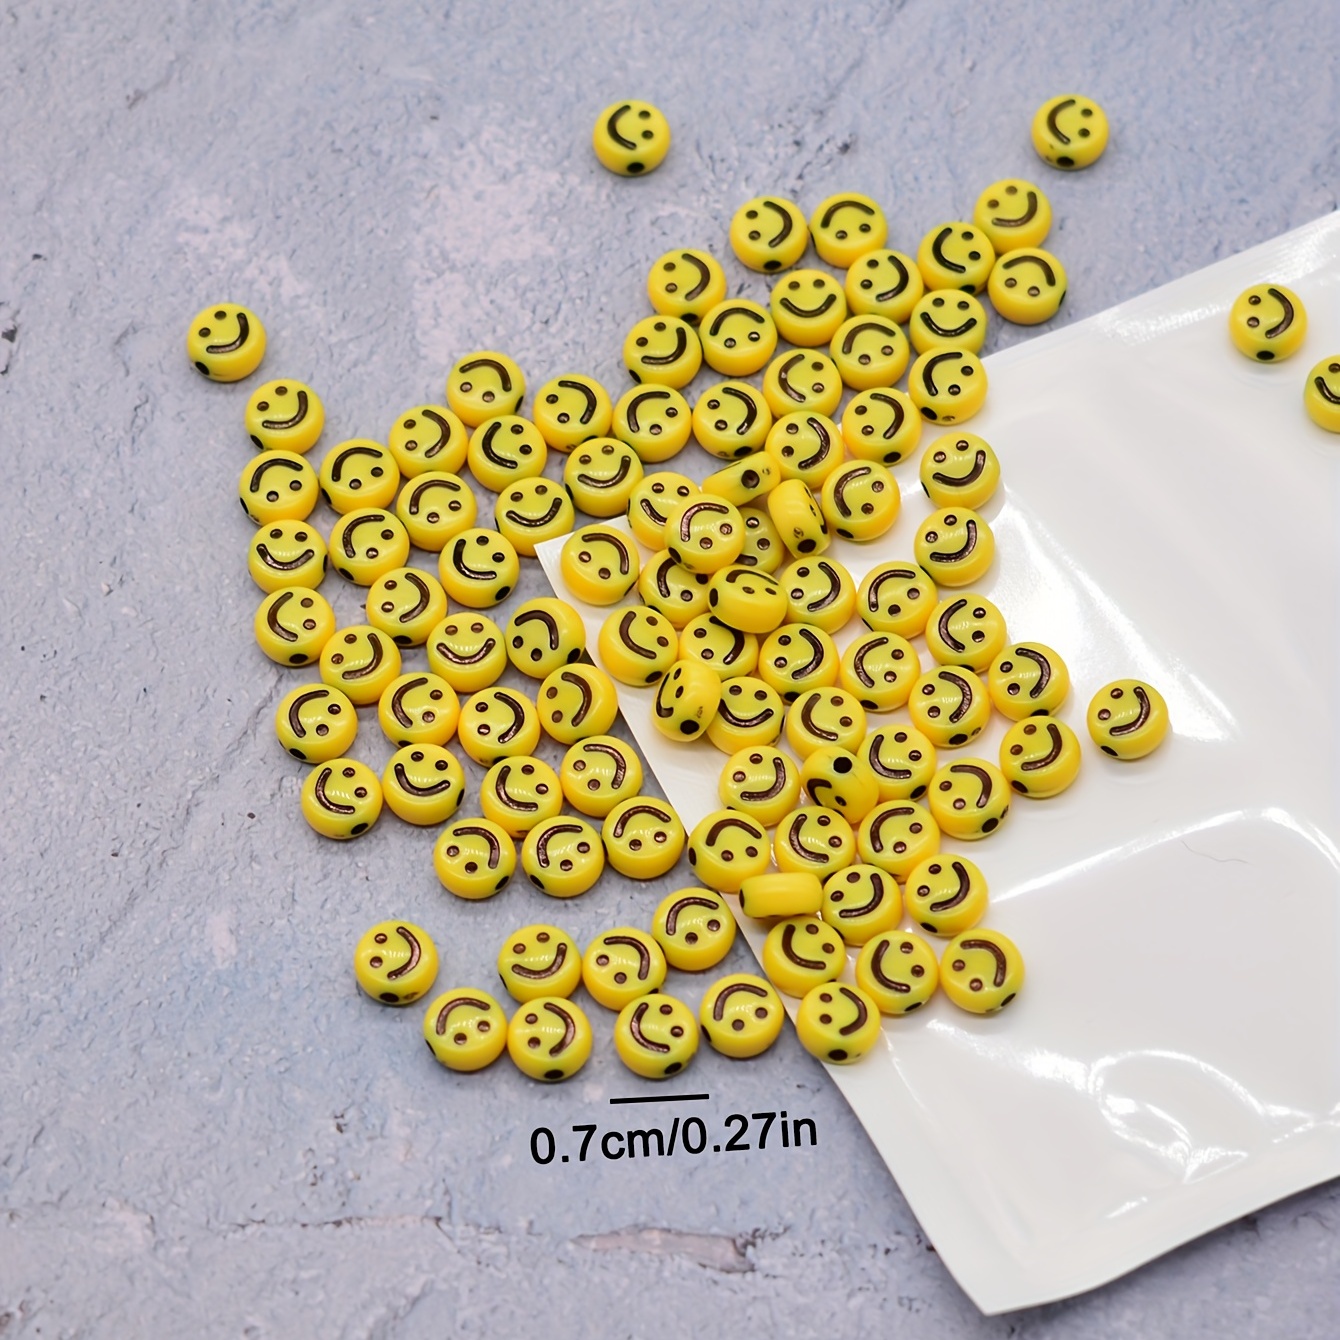  Smile Face Beads, 10mm Happy Face, Acrylic, Cute Spacer Beads,  Necklace and Bracelet Making, Jewelry Supplies, 100pcs (Colorful)